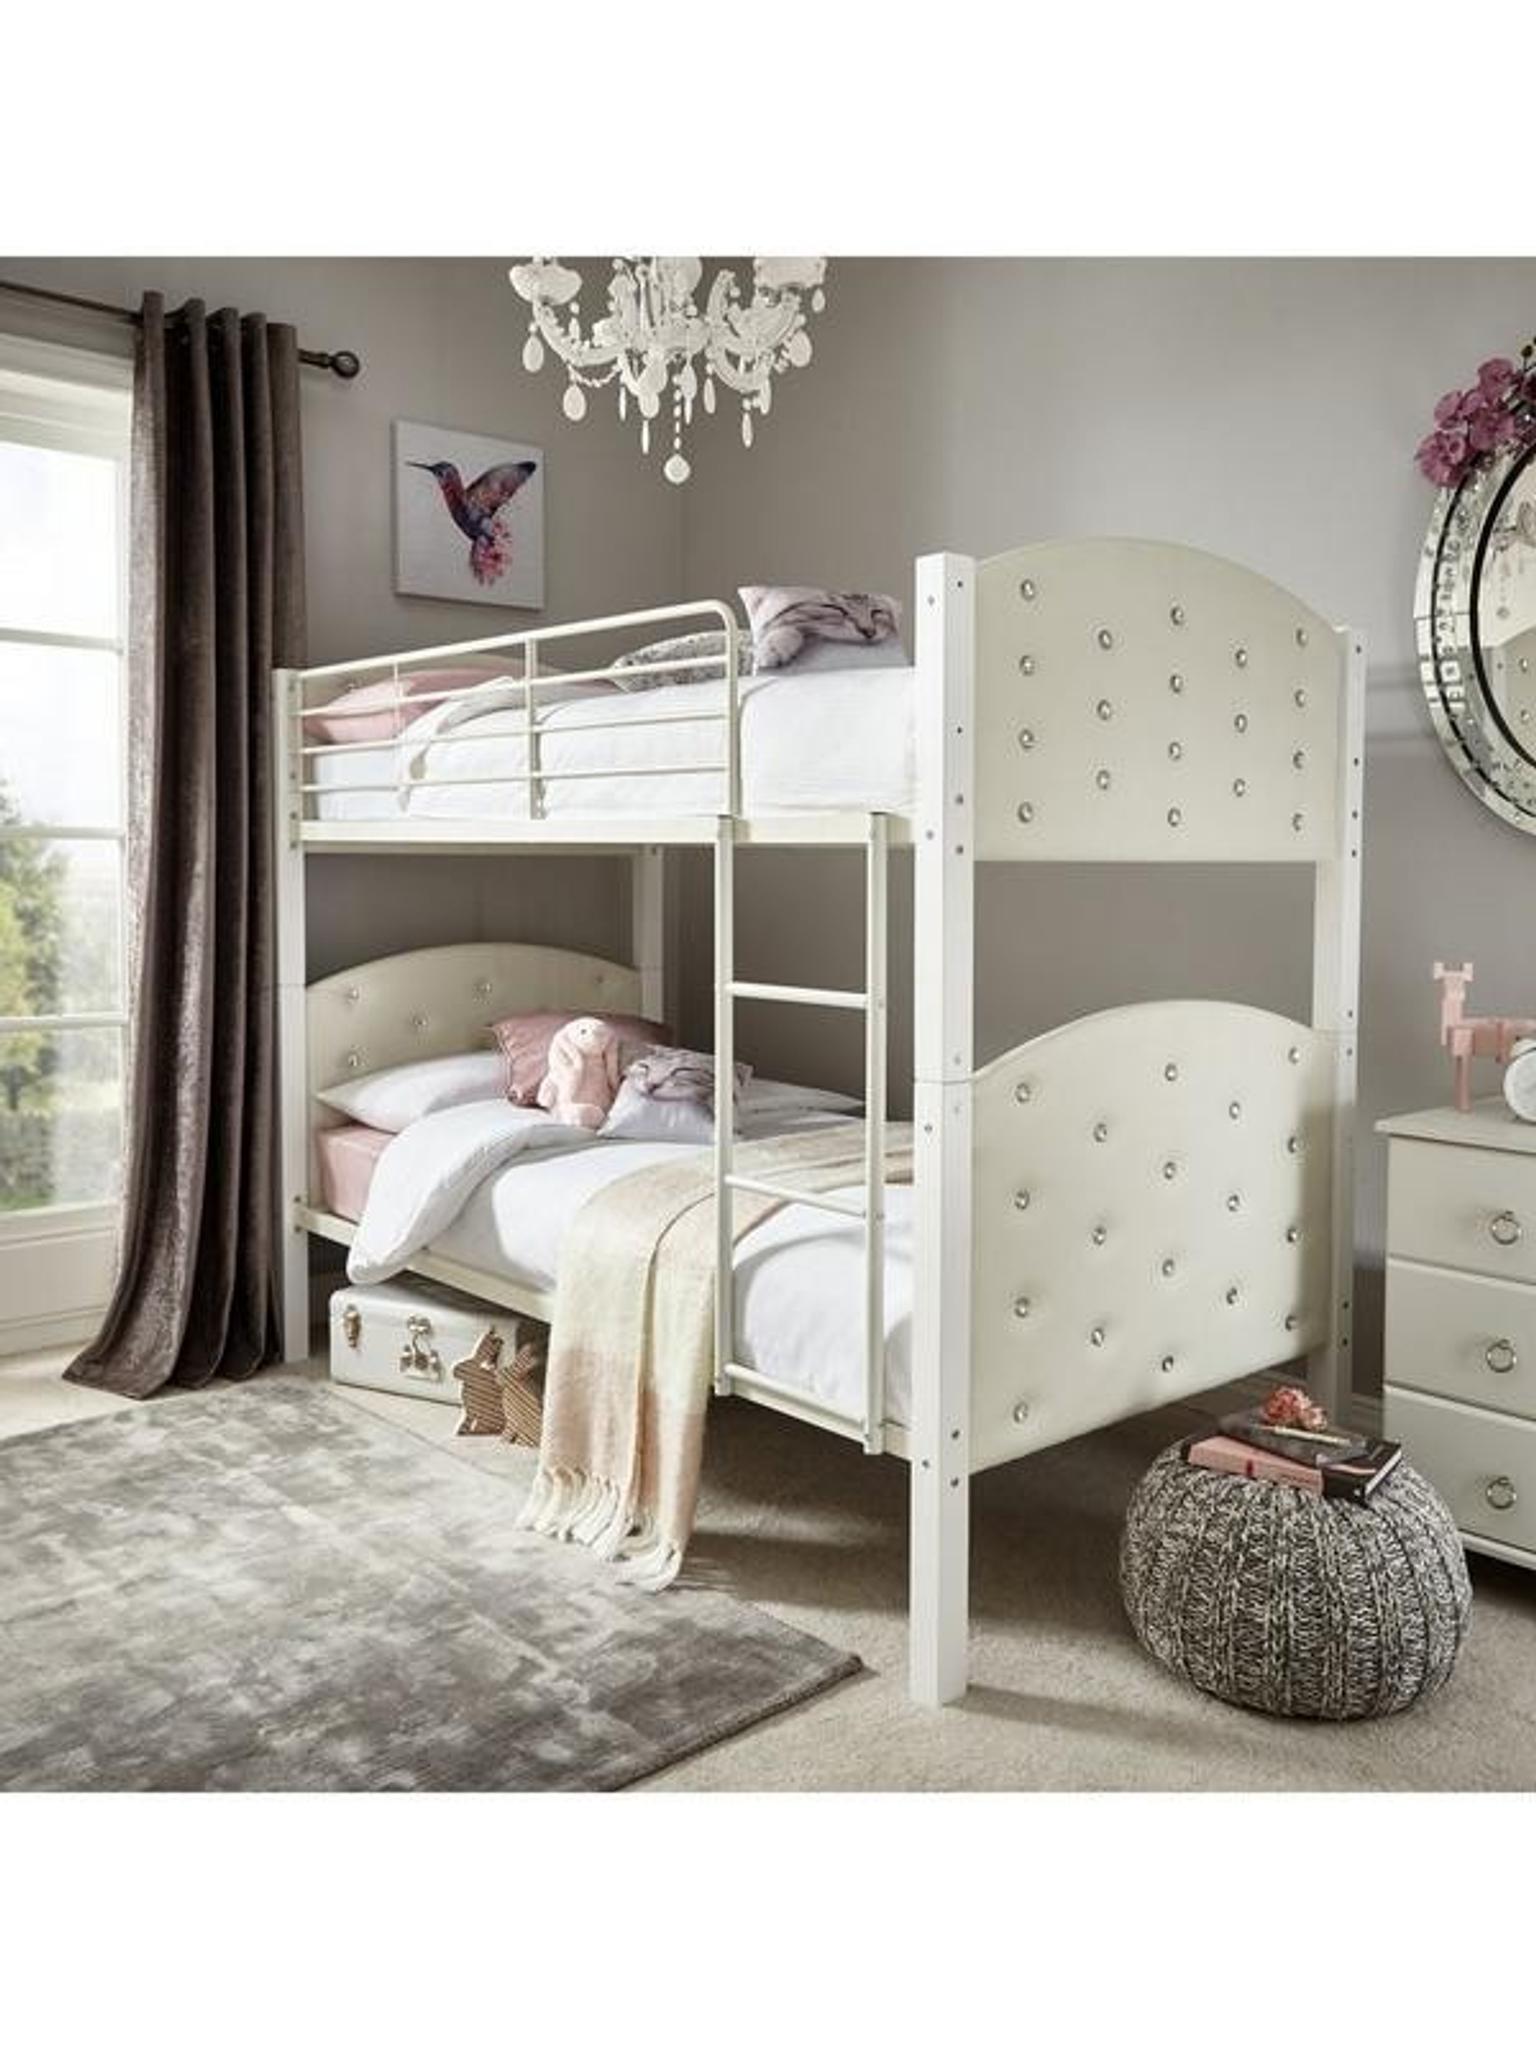 Bunk Beds In Ng15 Linby For 100 00, Girls White Bunk Beds